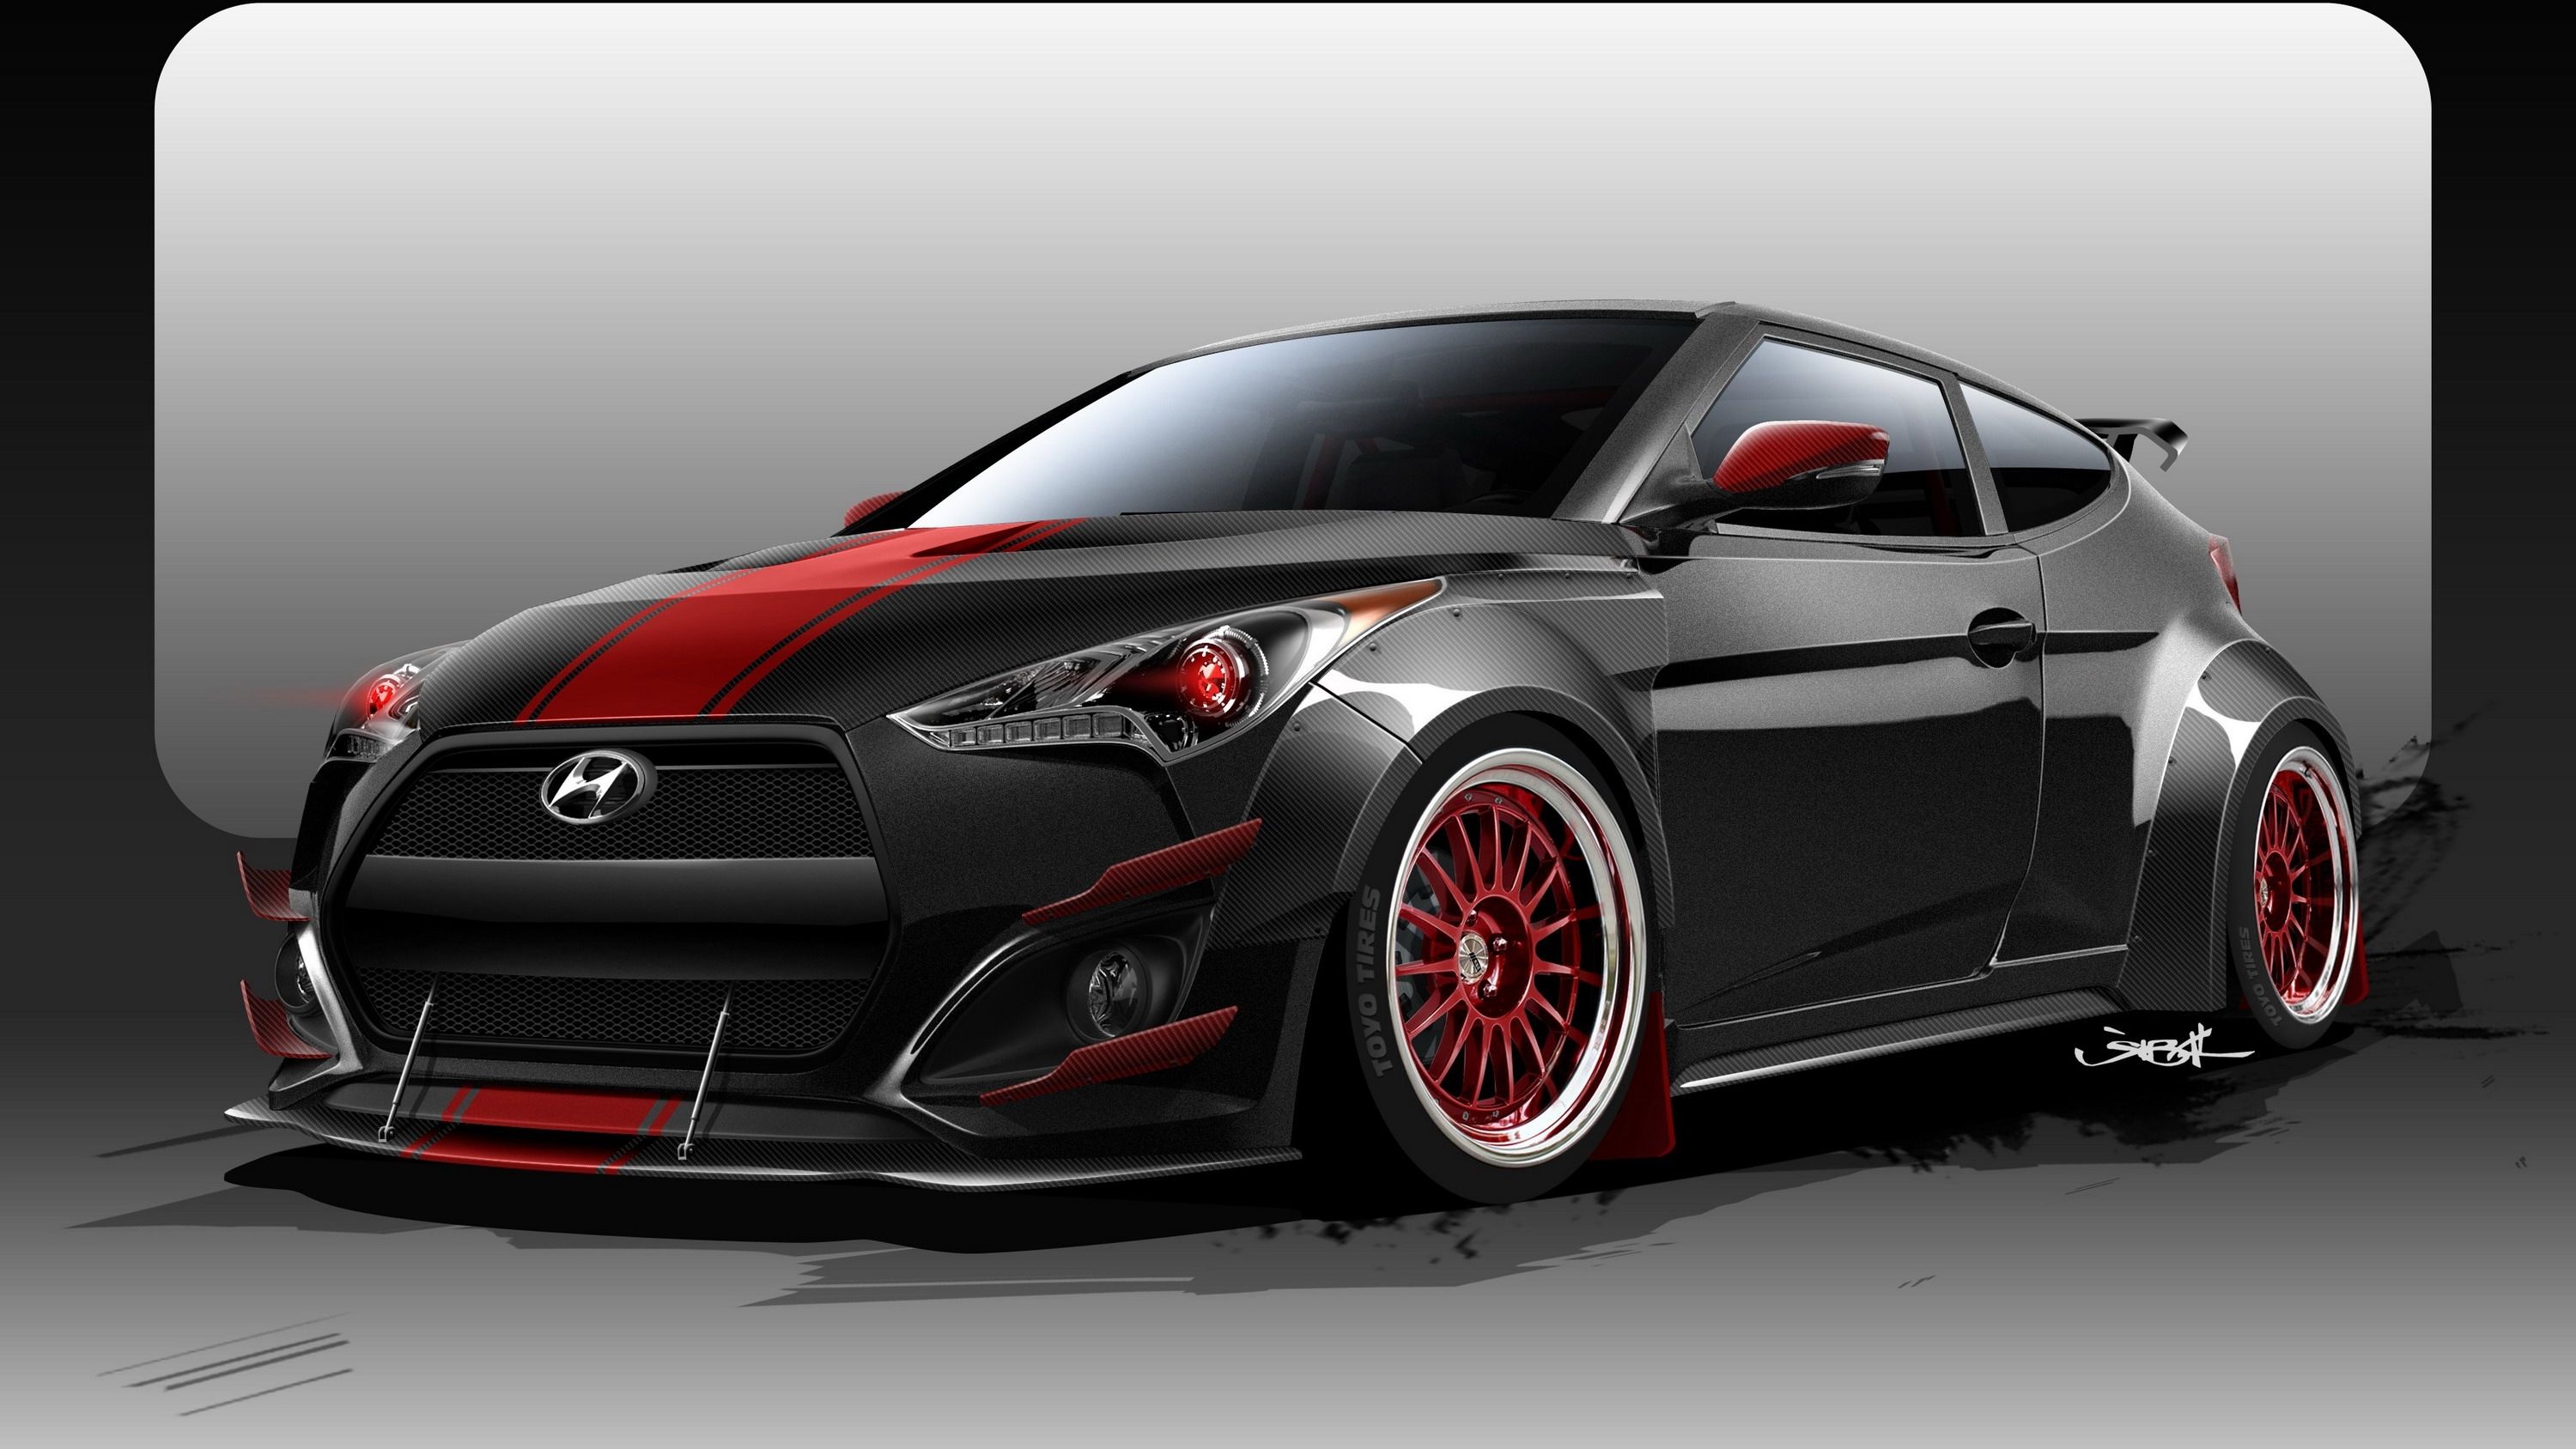 2015 Hyundai Veloster Turbo By Blood Type Racing